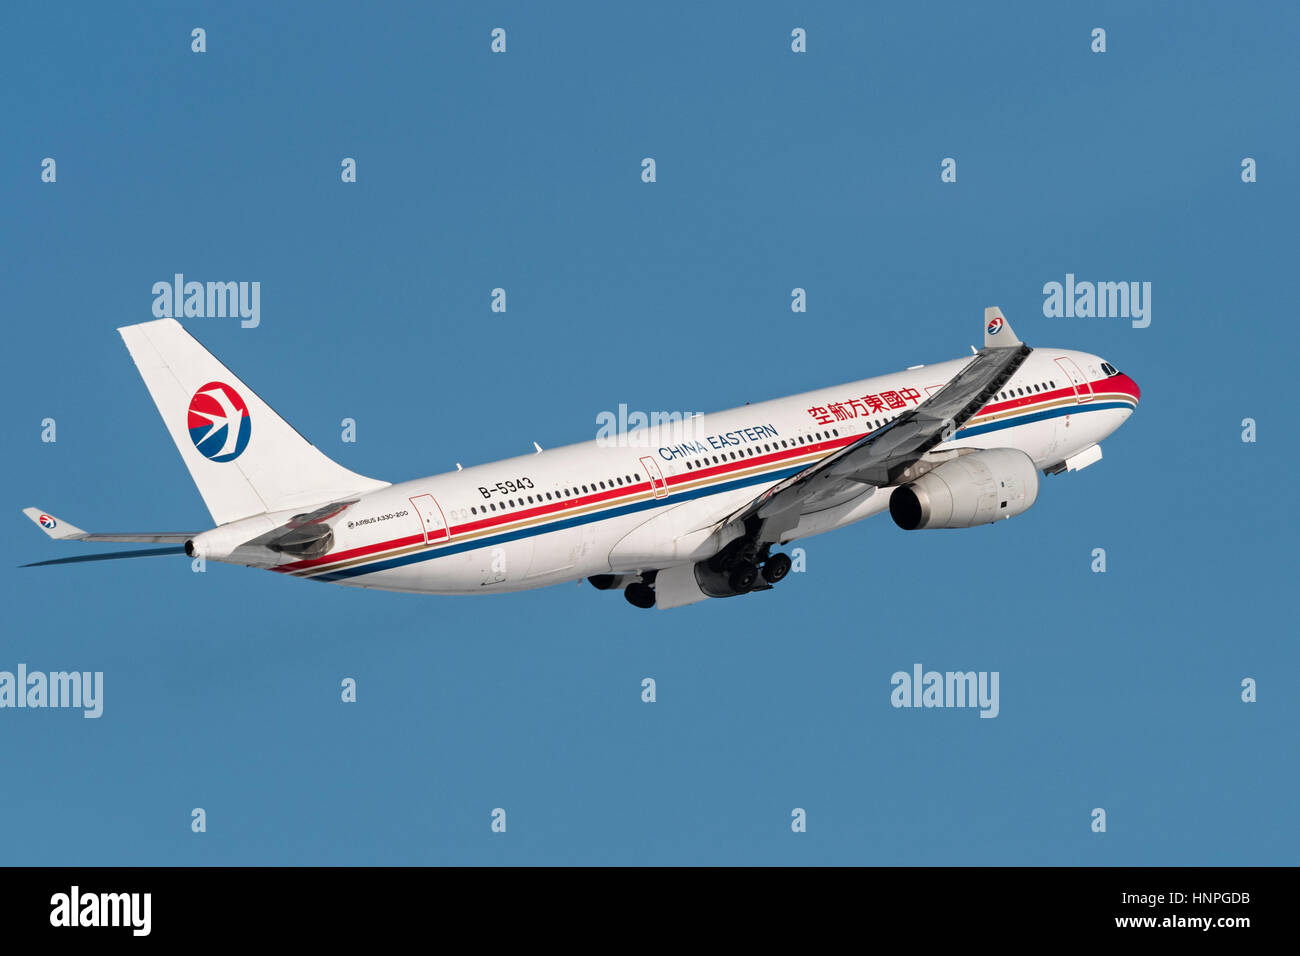 China Eastern Airlines plane airplane Airbus A330 (A330-200) wide-body jet airliner jetliner airborne Stock Photo